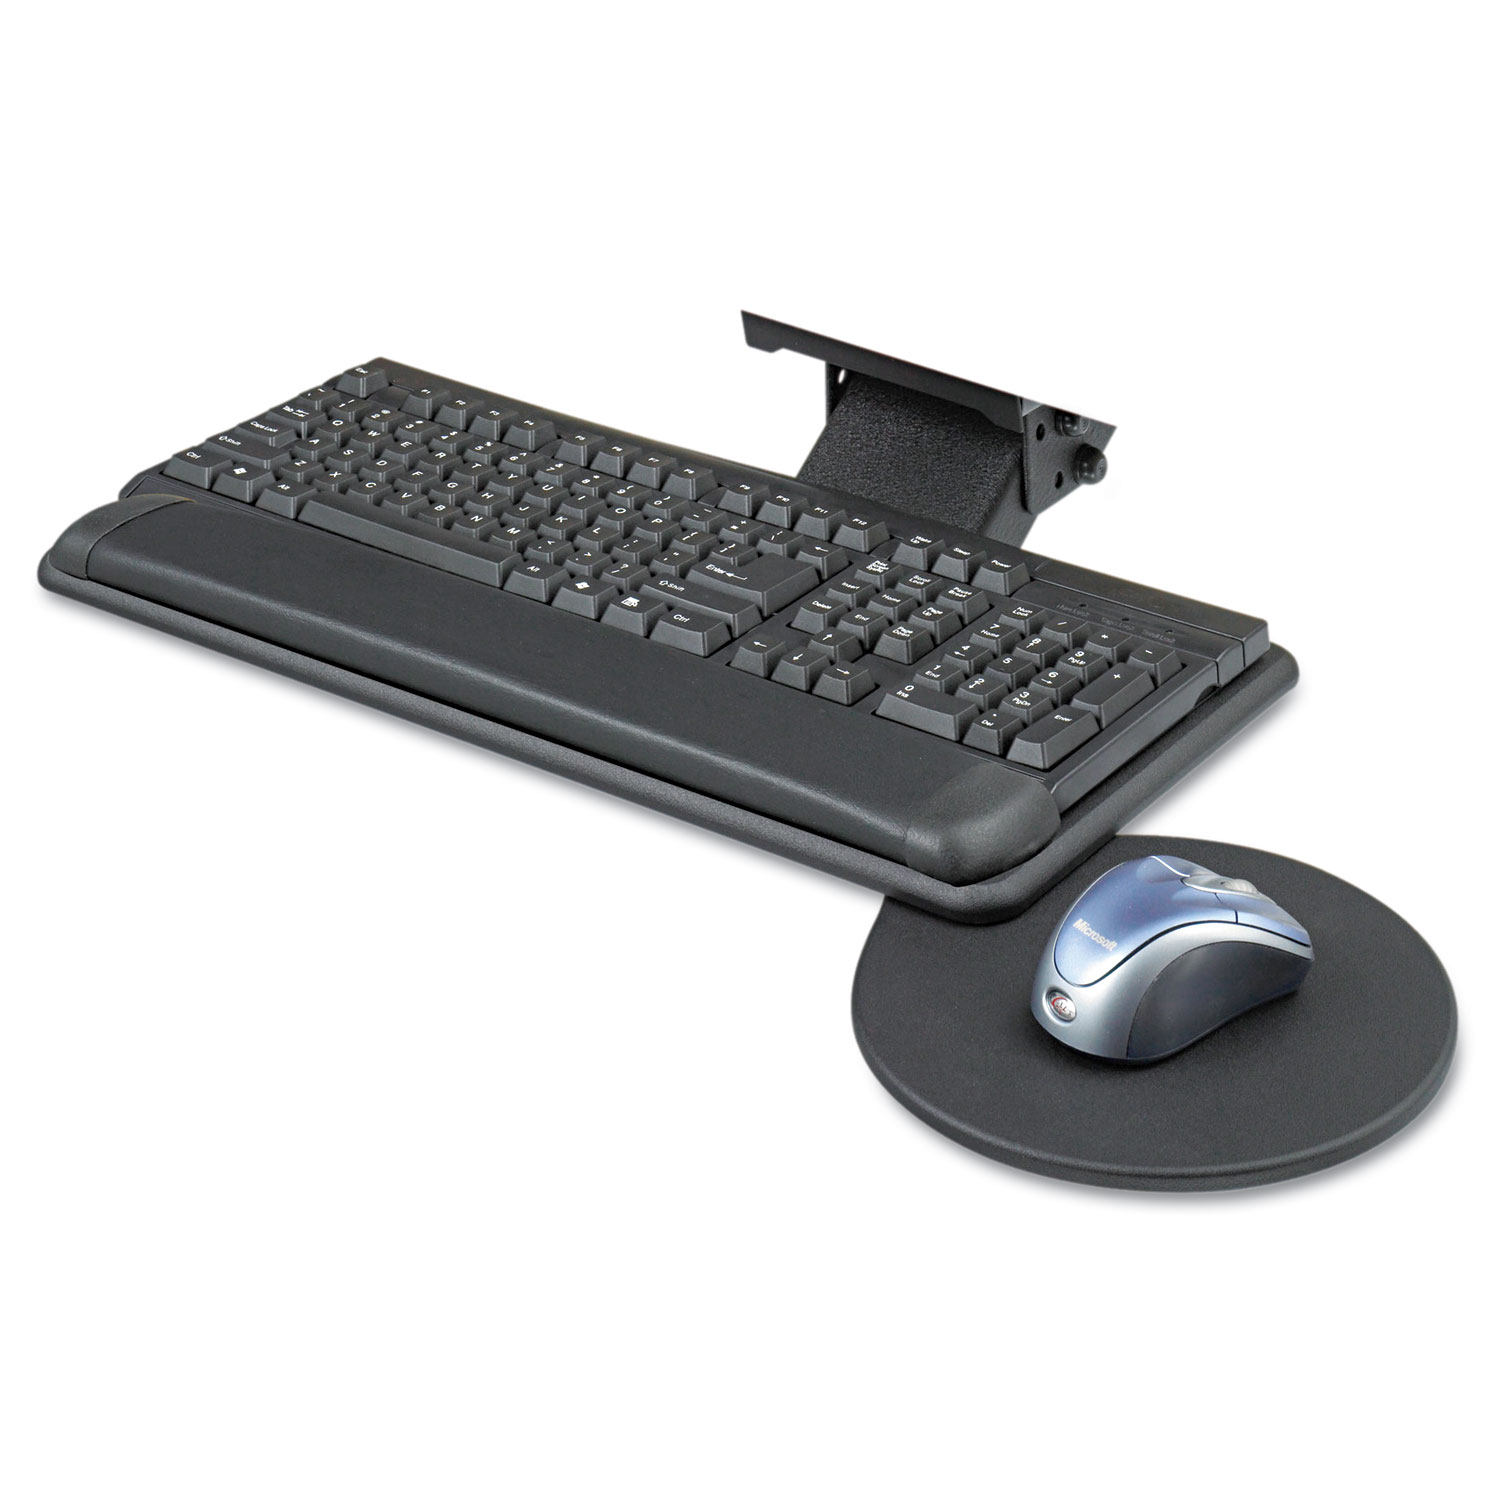 Adjustable Keyboard Platform With Swivel Mouse Tray 18 1 2w X 9 1